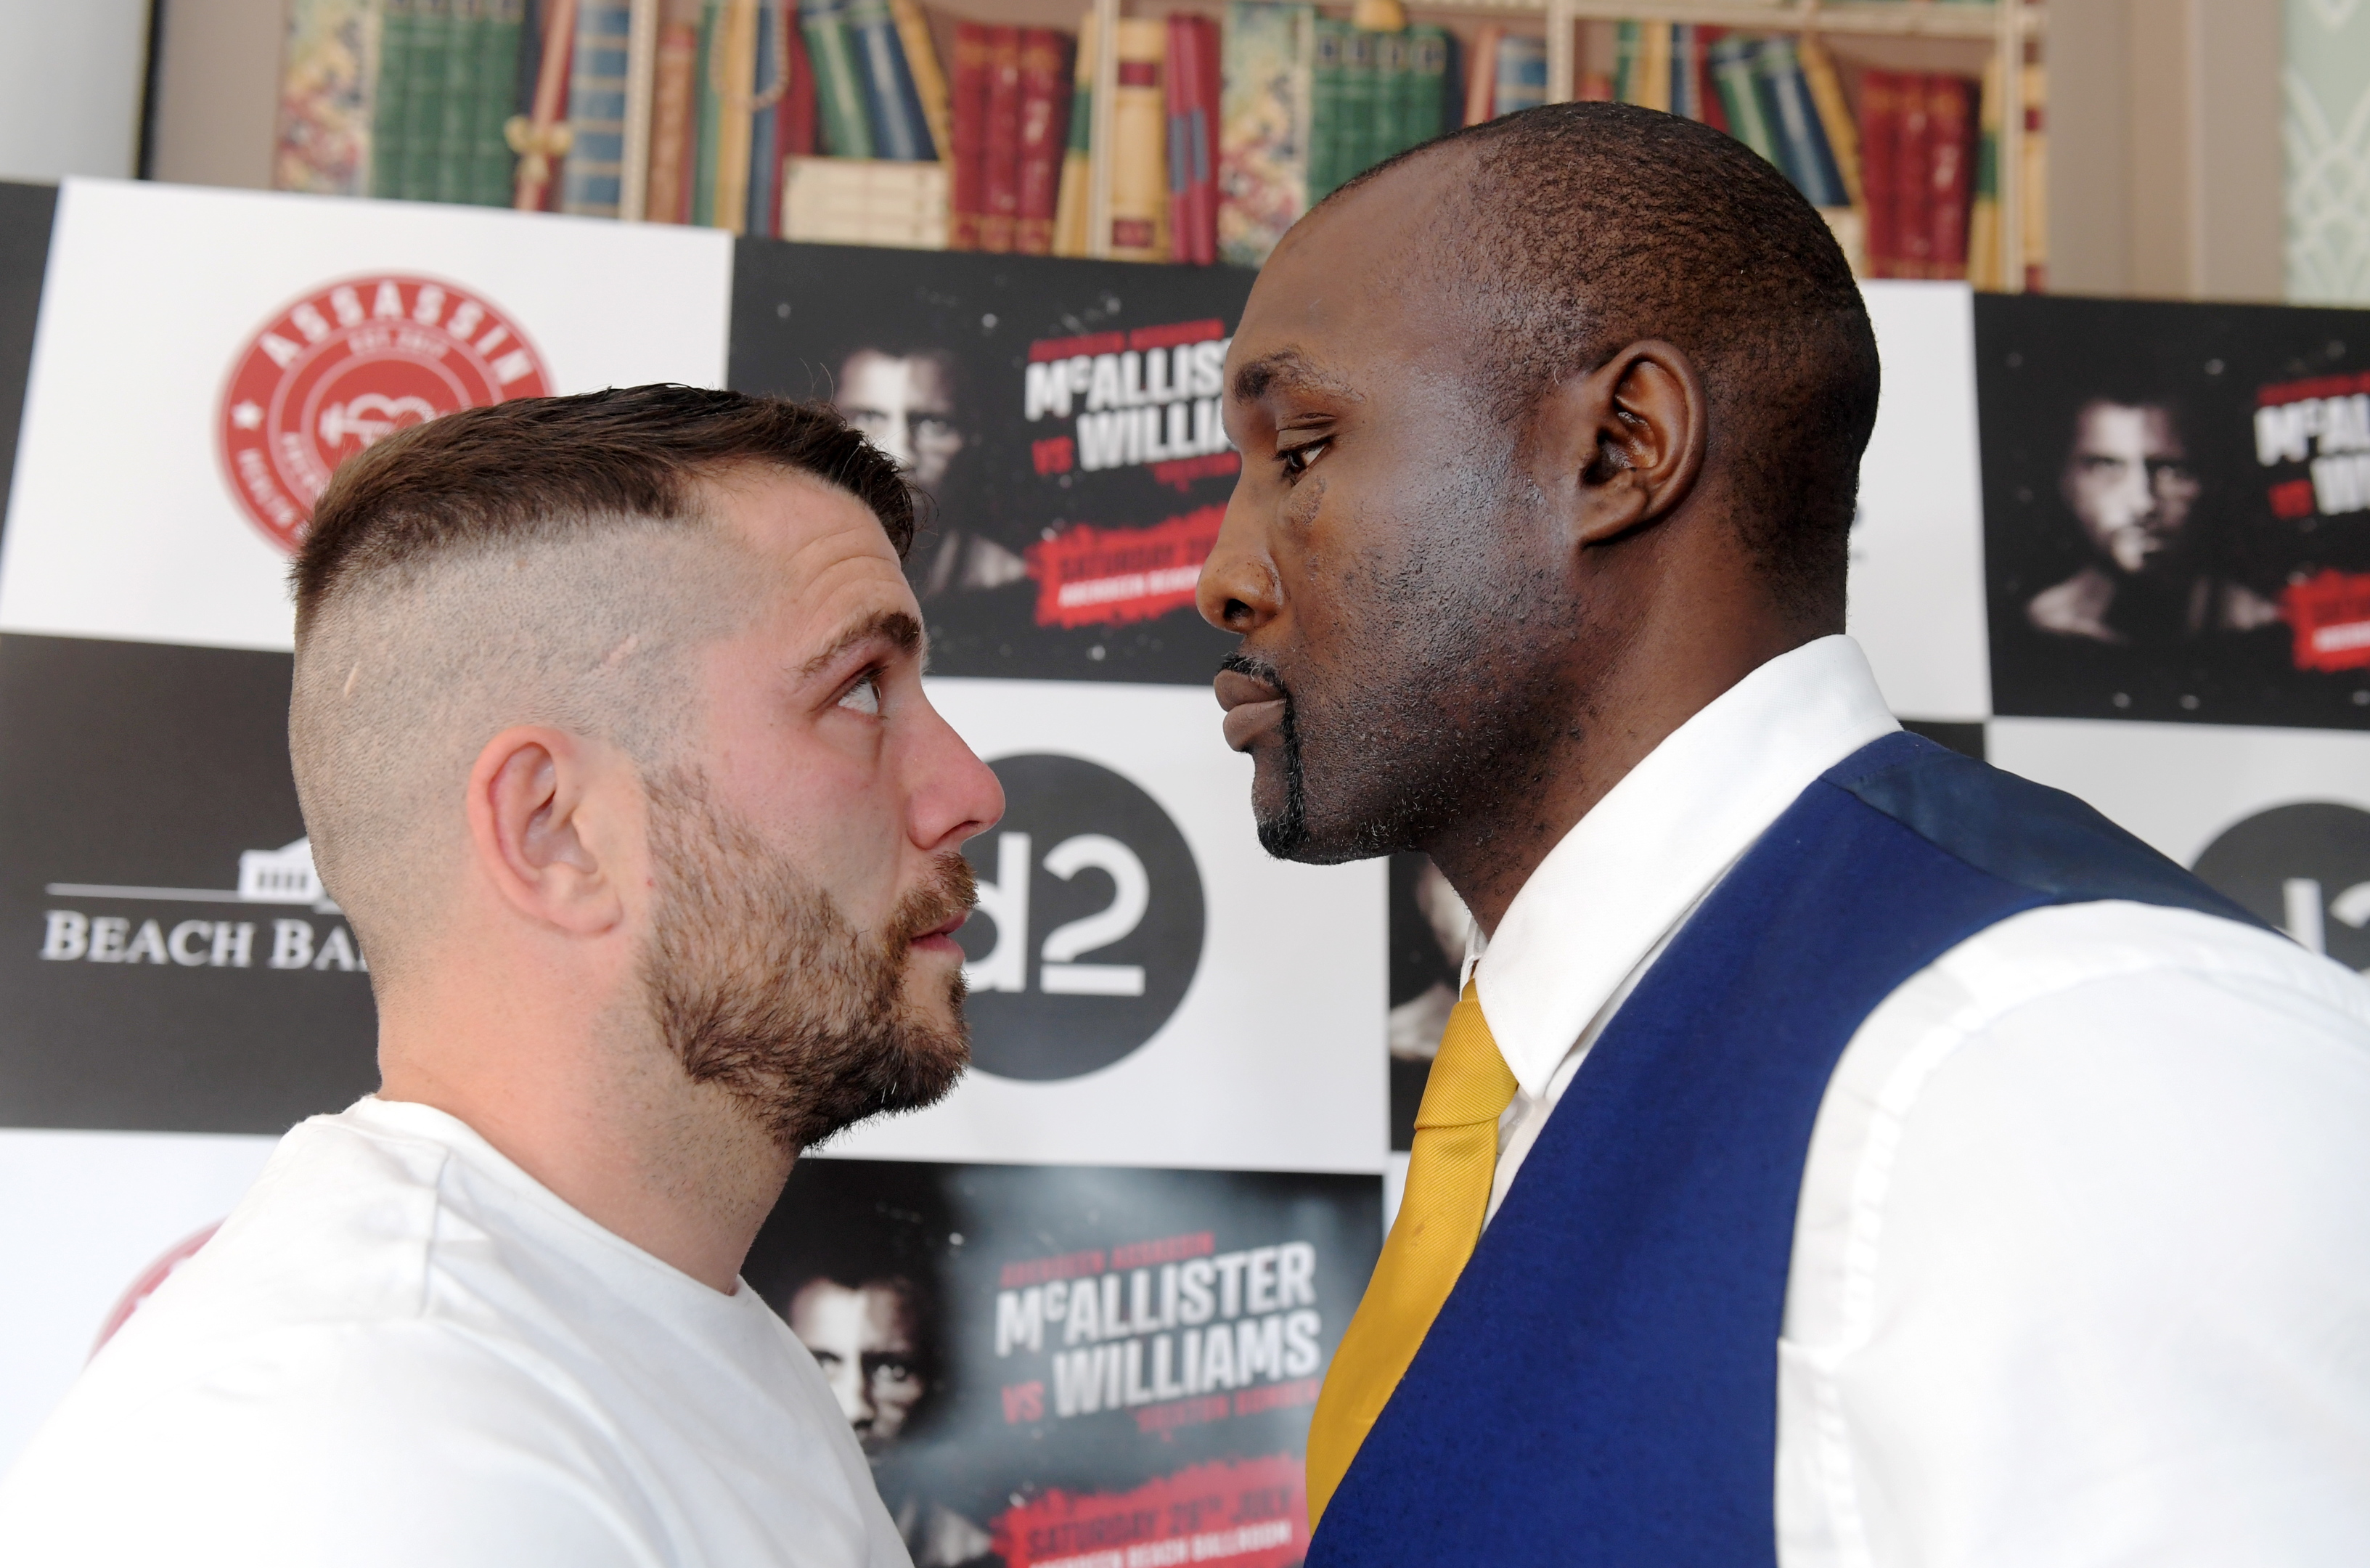 Lee McAllister is facing Danny Williams at the Beach Ballroom on July 28.